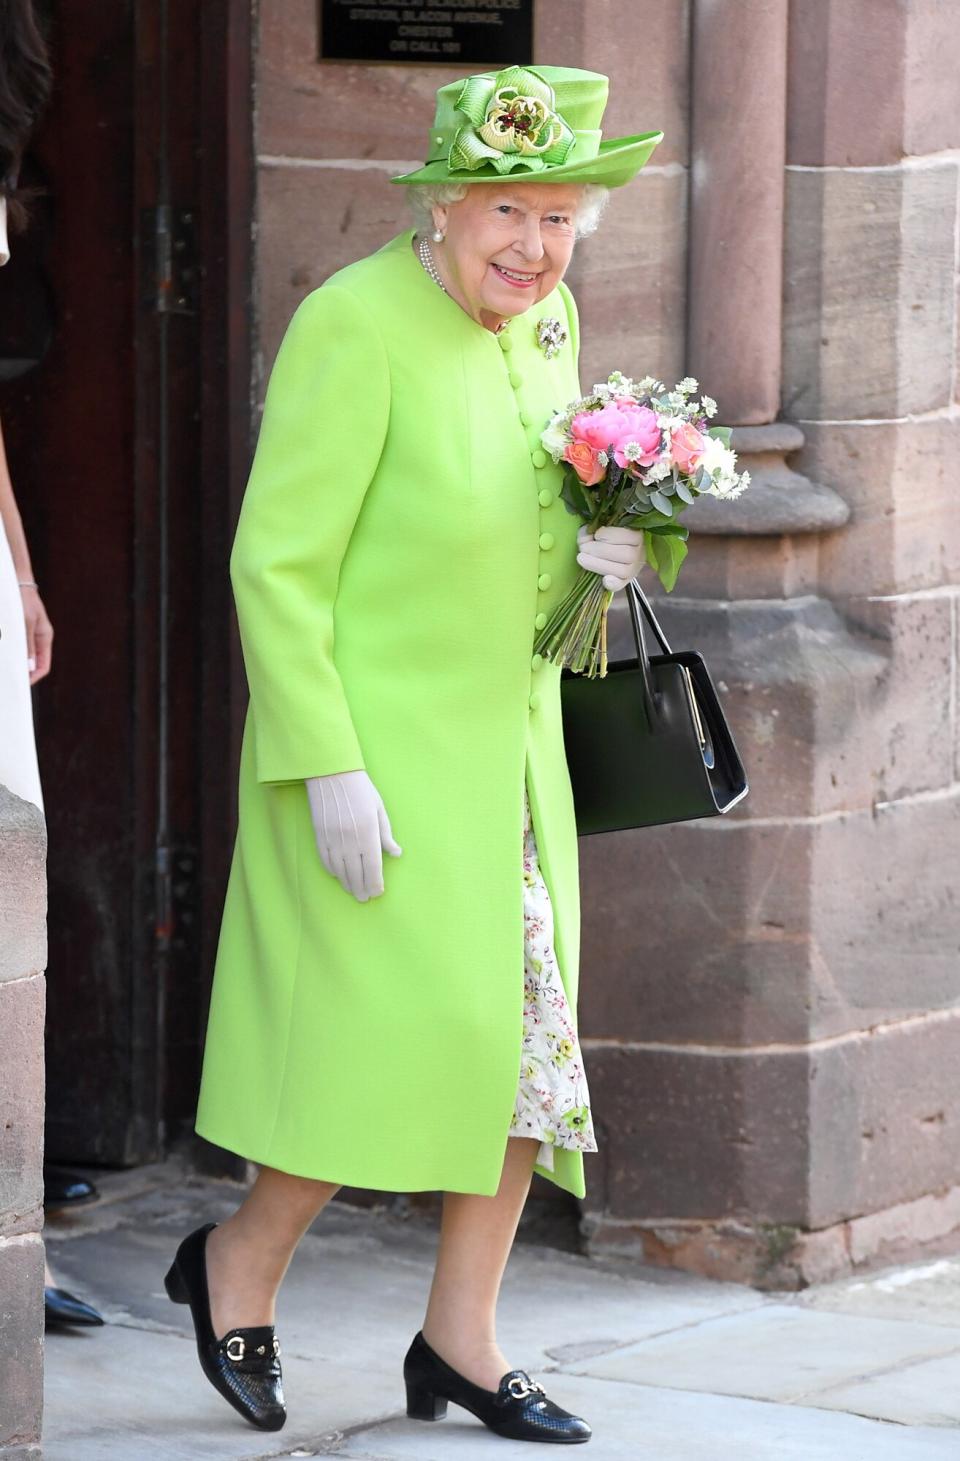 Queen Elizabeth II departs Chester Town Hall, where she attended lunch with Meghan, Duchess of Sussex as guests of Chester City Council on June 14, 2018 in Chester, England. Meghan Markle married Prince Harry last month to become The Duchess of Sussex and this is her first engagement with the Queen. During the visit the pair opened a road bridge in Widnes and visited The Storyhouse in Chester